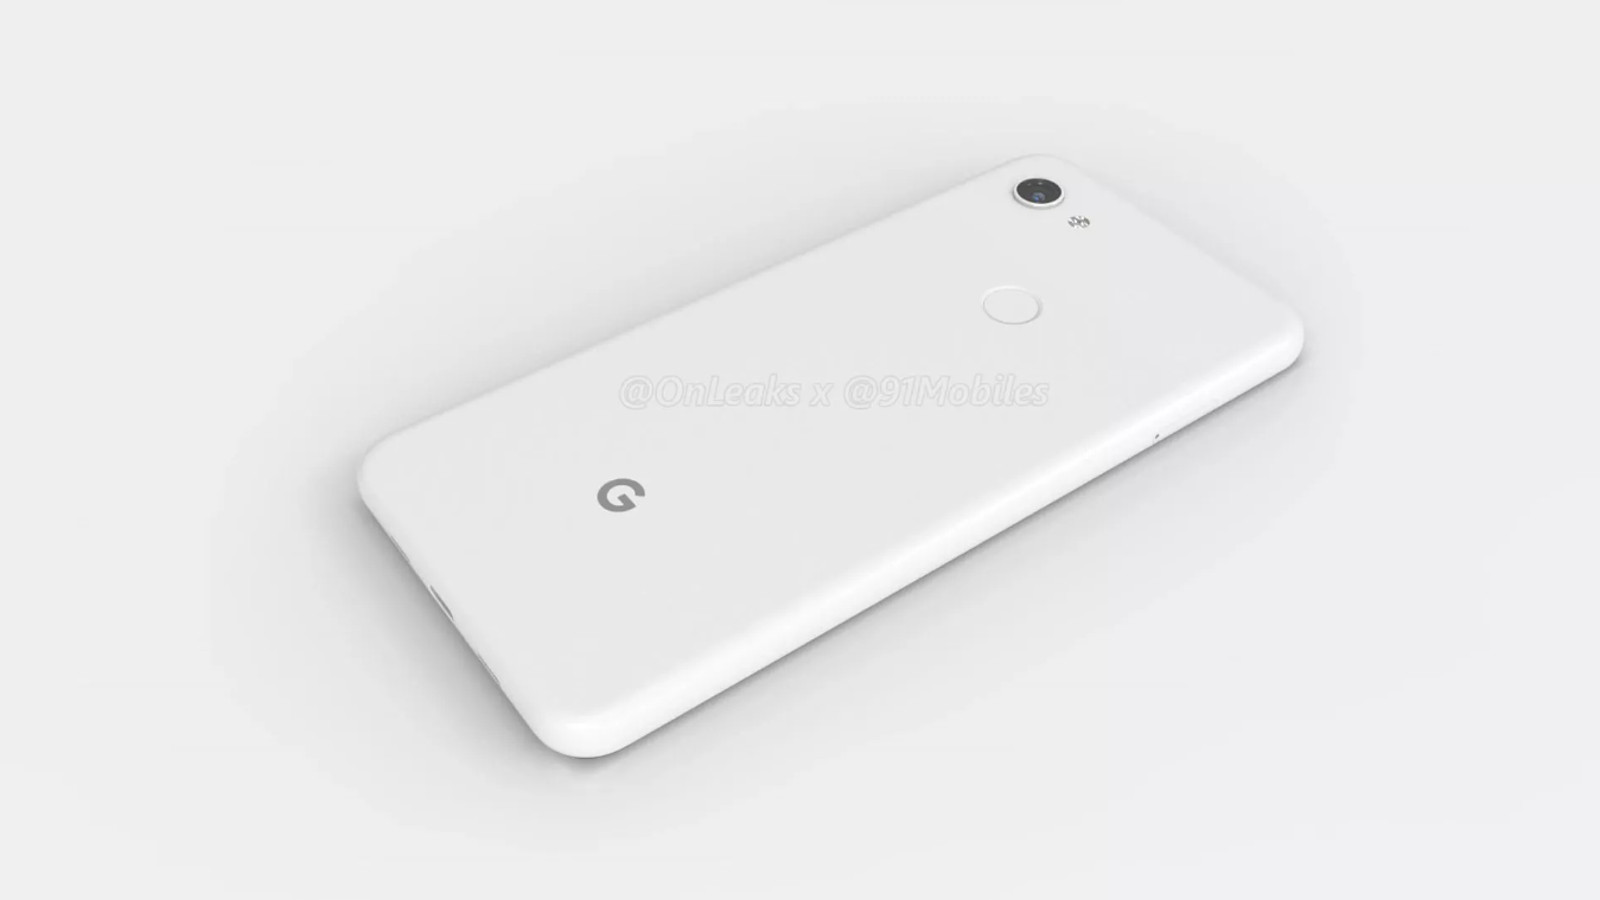 The back of the supposed Google Pixel 3 Lite XL.